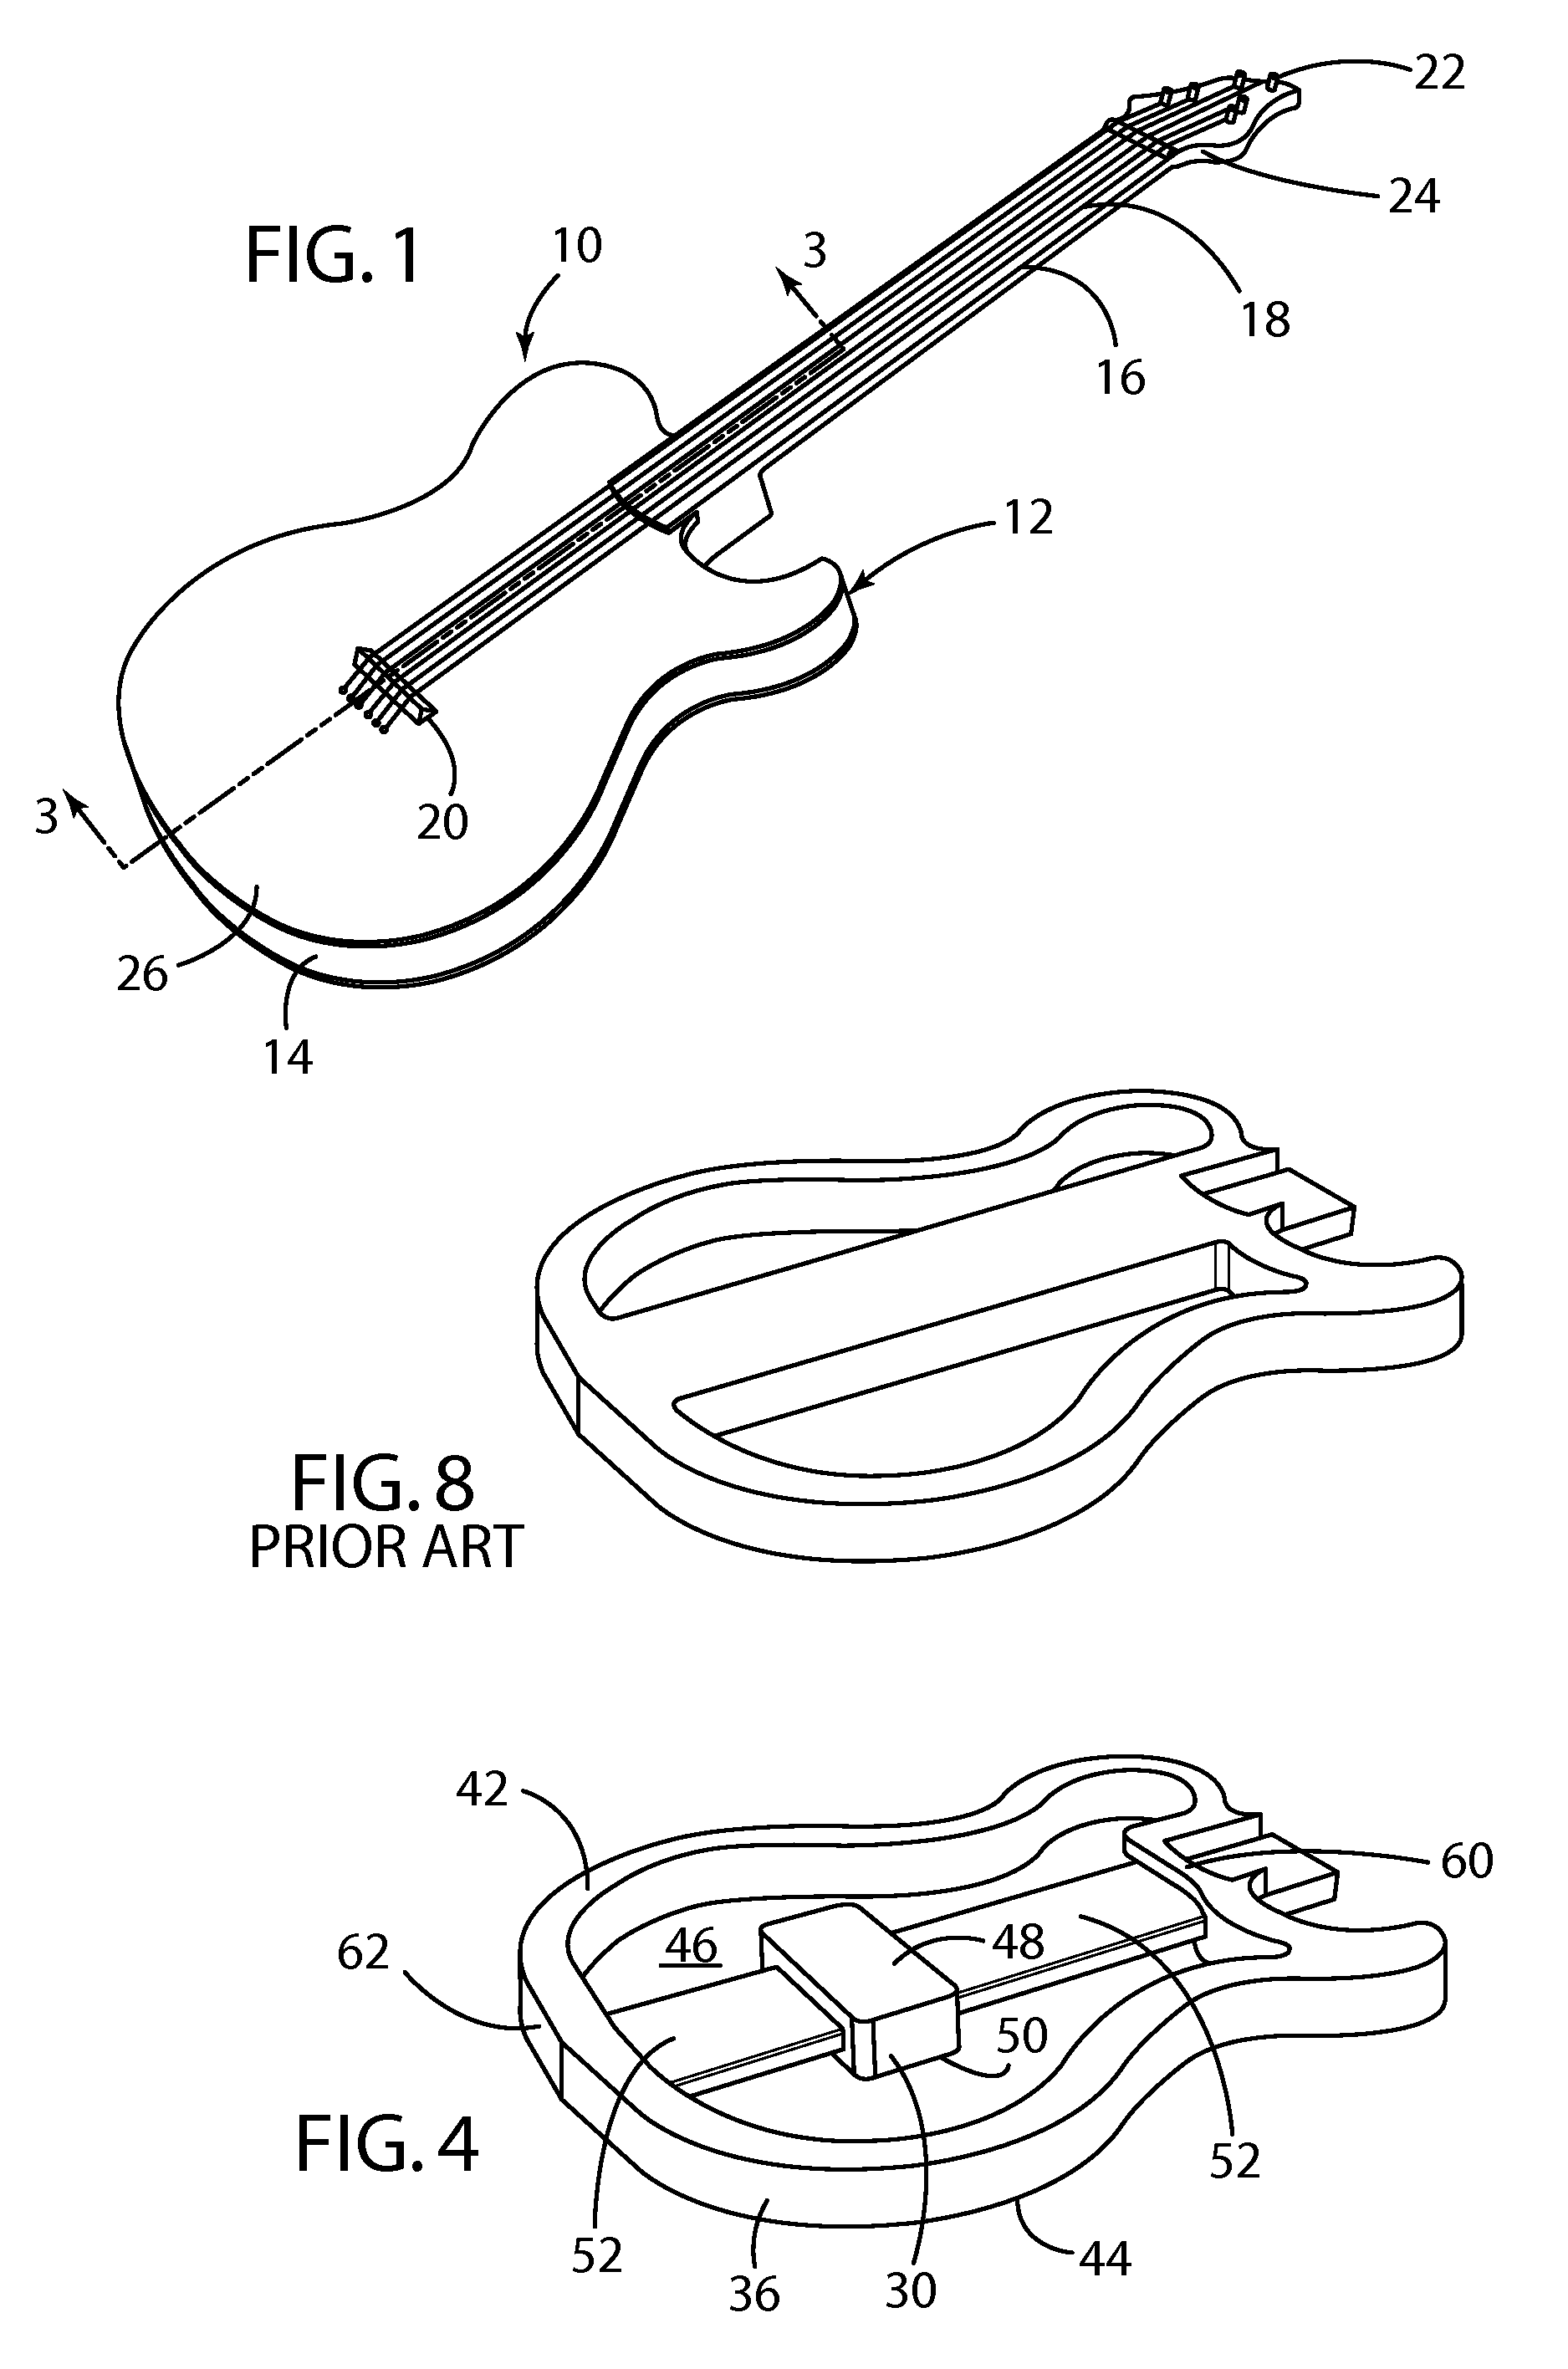 Structure for musical instrument body